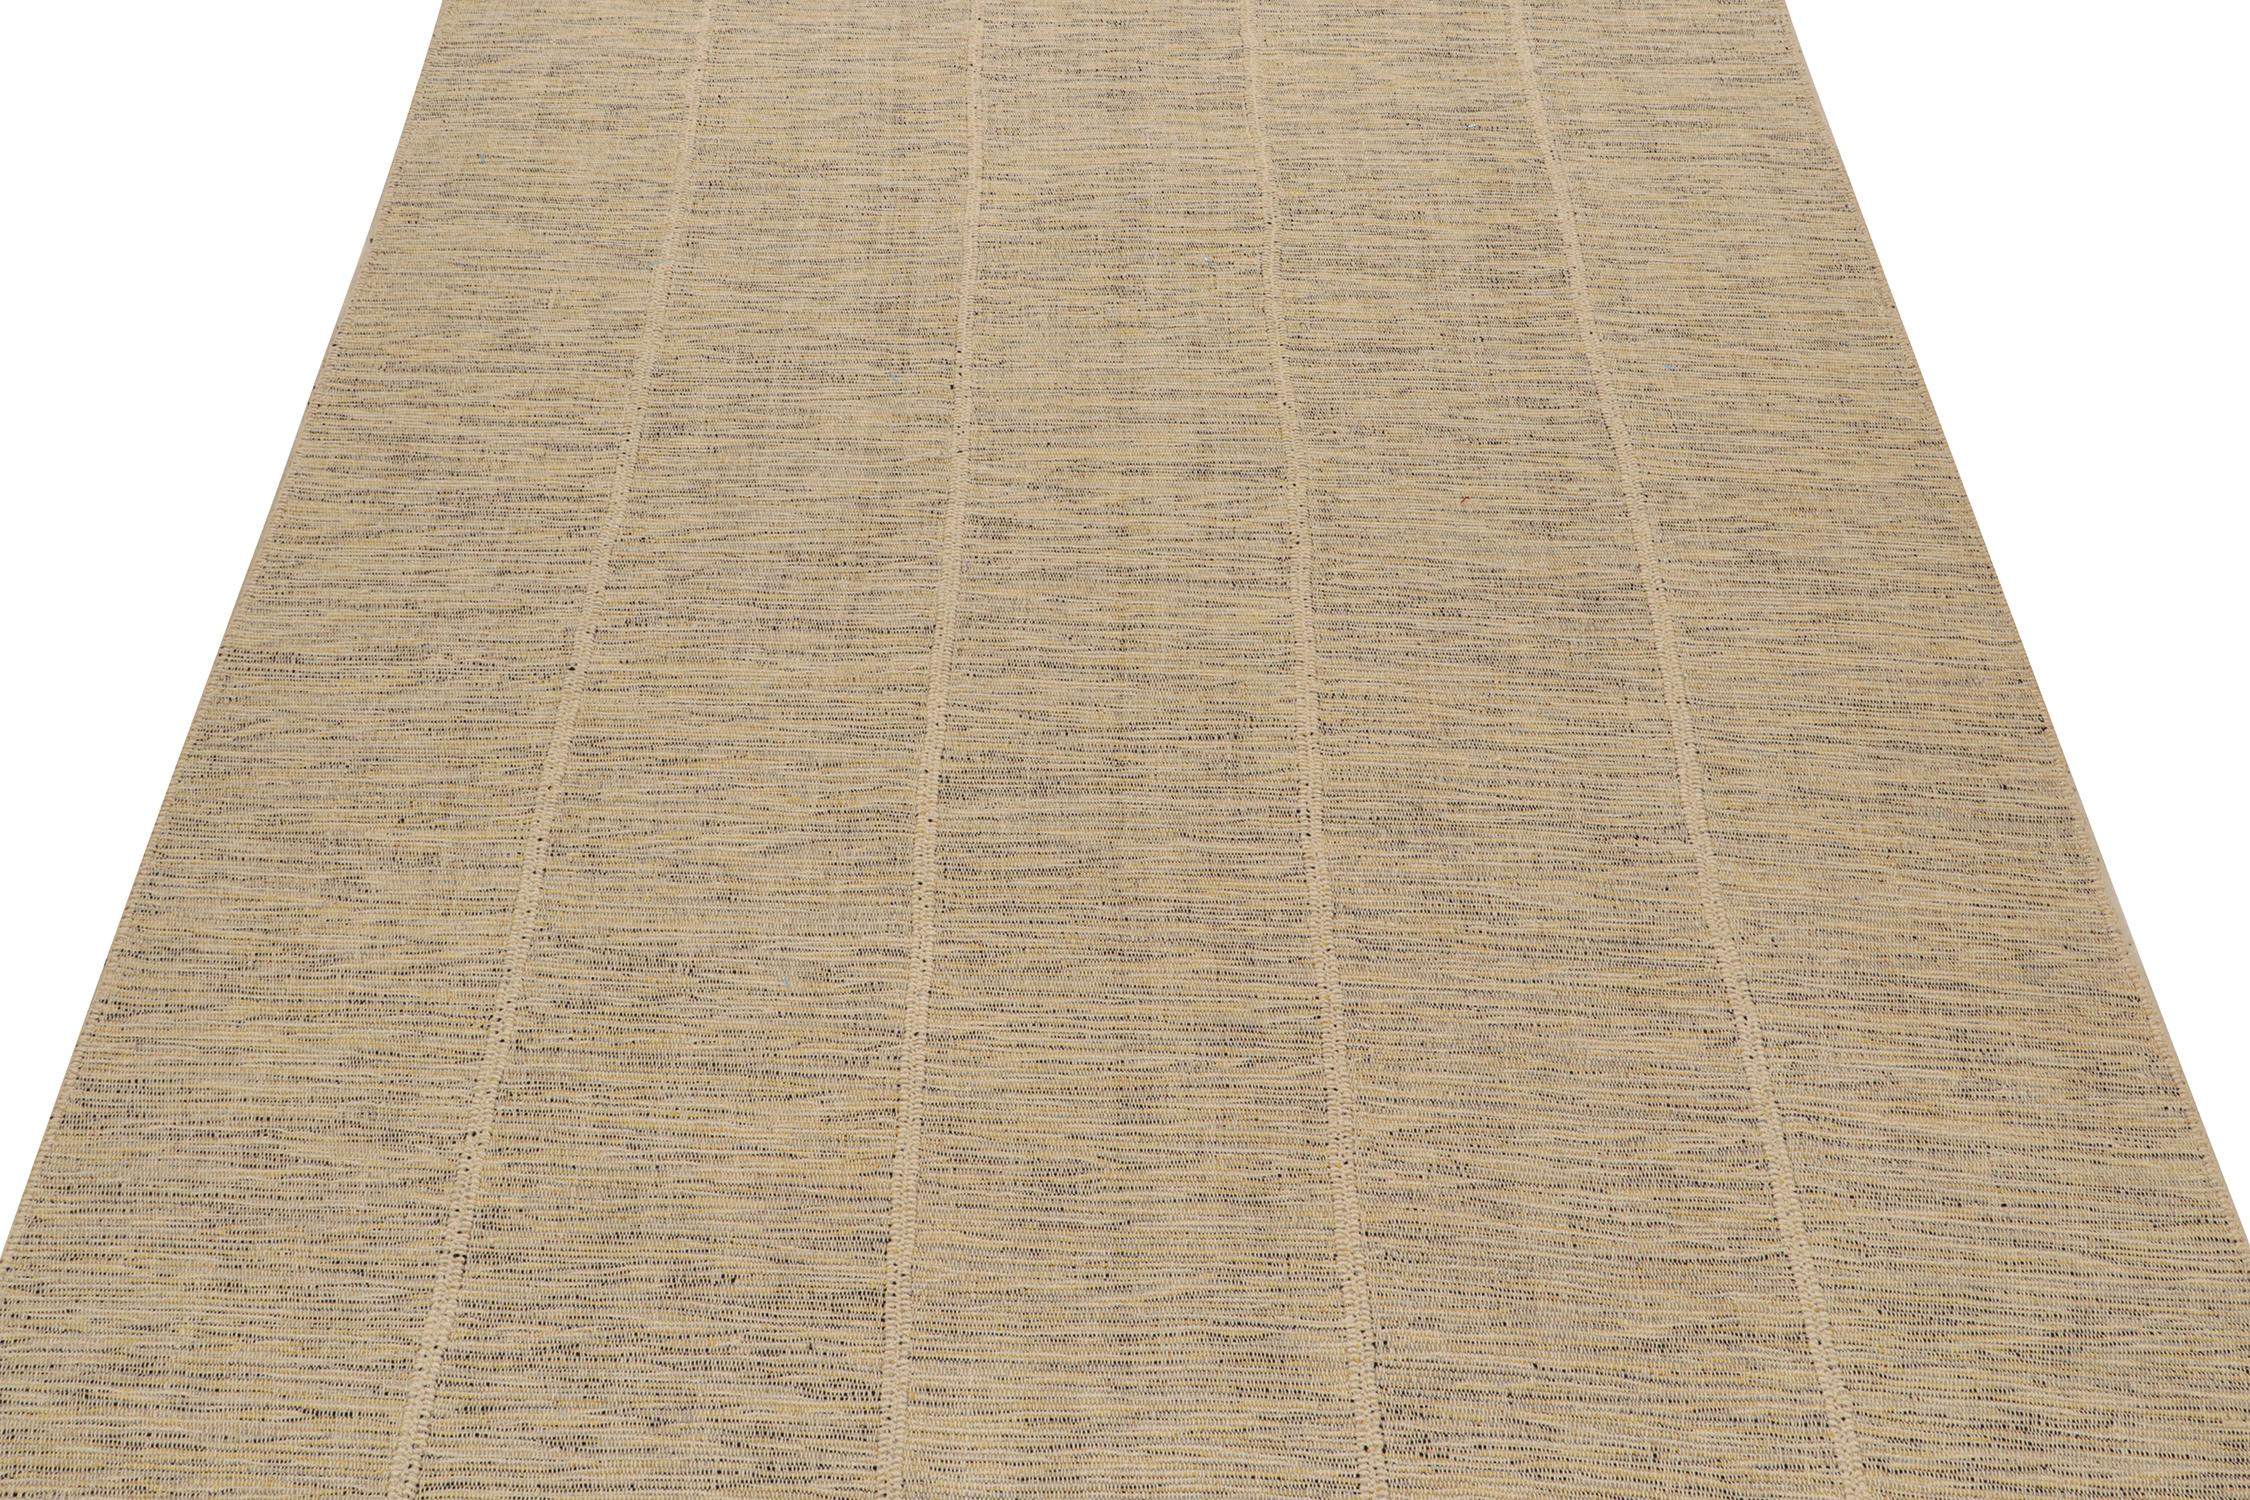 Handwoven in wool, this 9x12 Kilim is from a bold new line of contemporary flatweaves by Rug & Kilim.

Further On the Design:

The “Rez Kilim” connotes a modern take on classic panel weaving. This edition enjoys comfortable tones of beige with